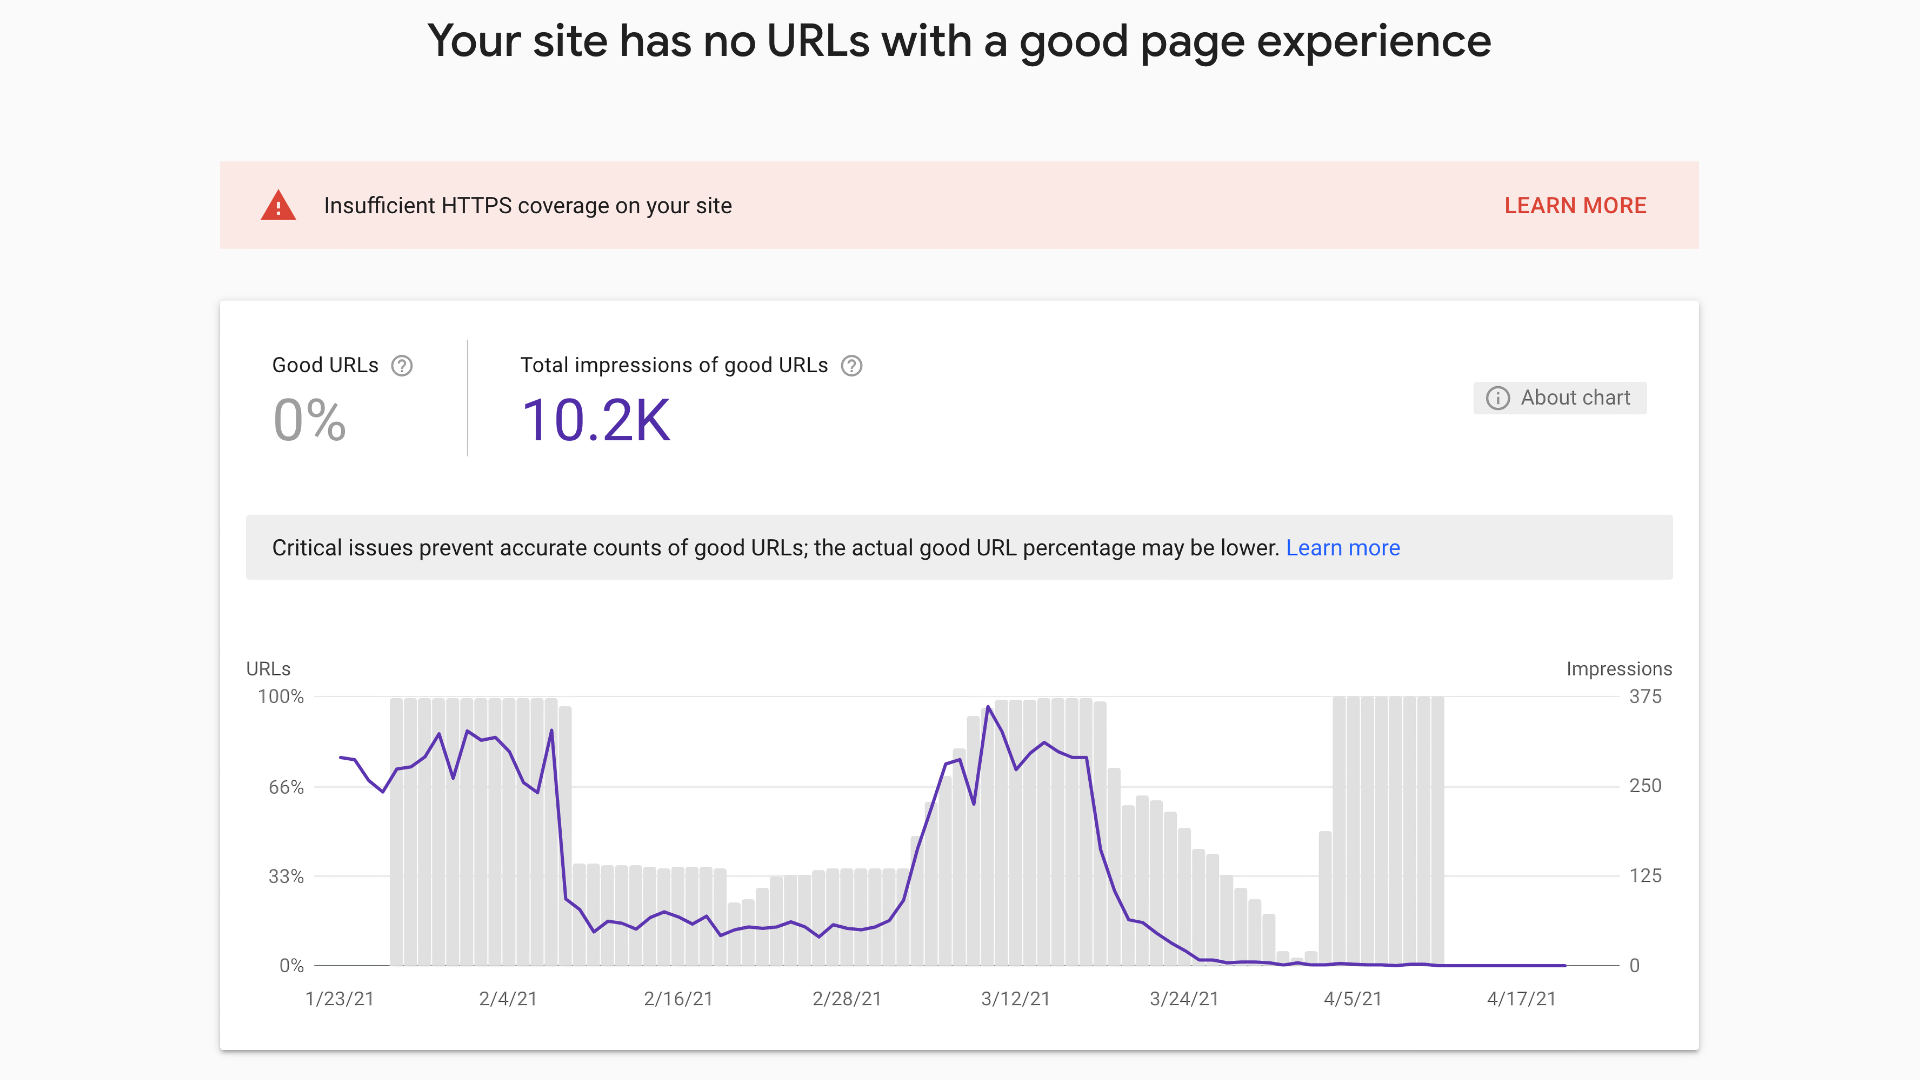 Google says a site has no URLs with HTTPS but, according to testing tools like Qualys SSL Labs, HTTPS is fine